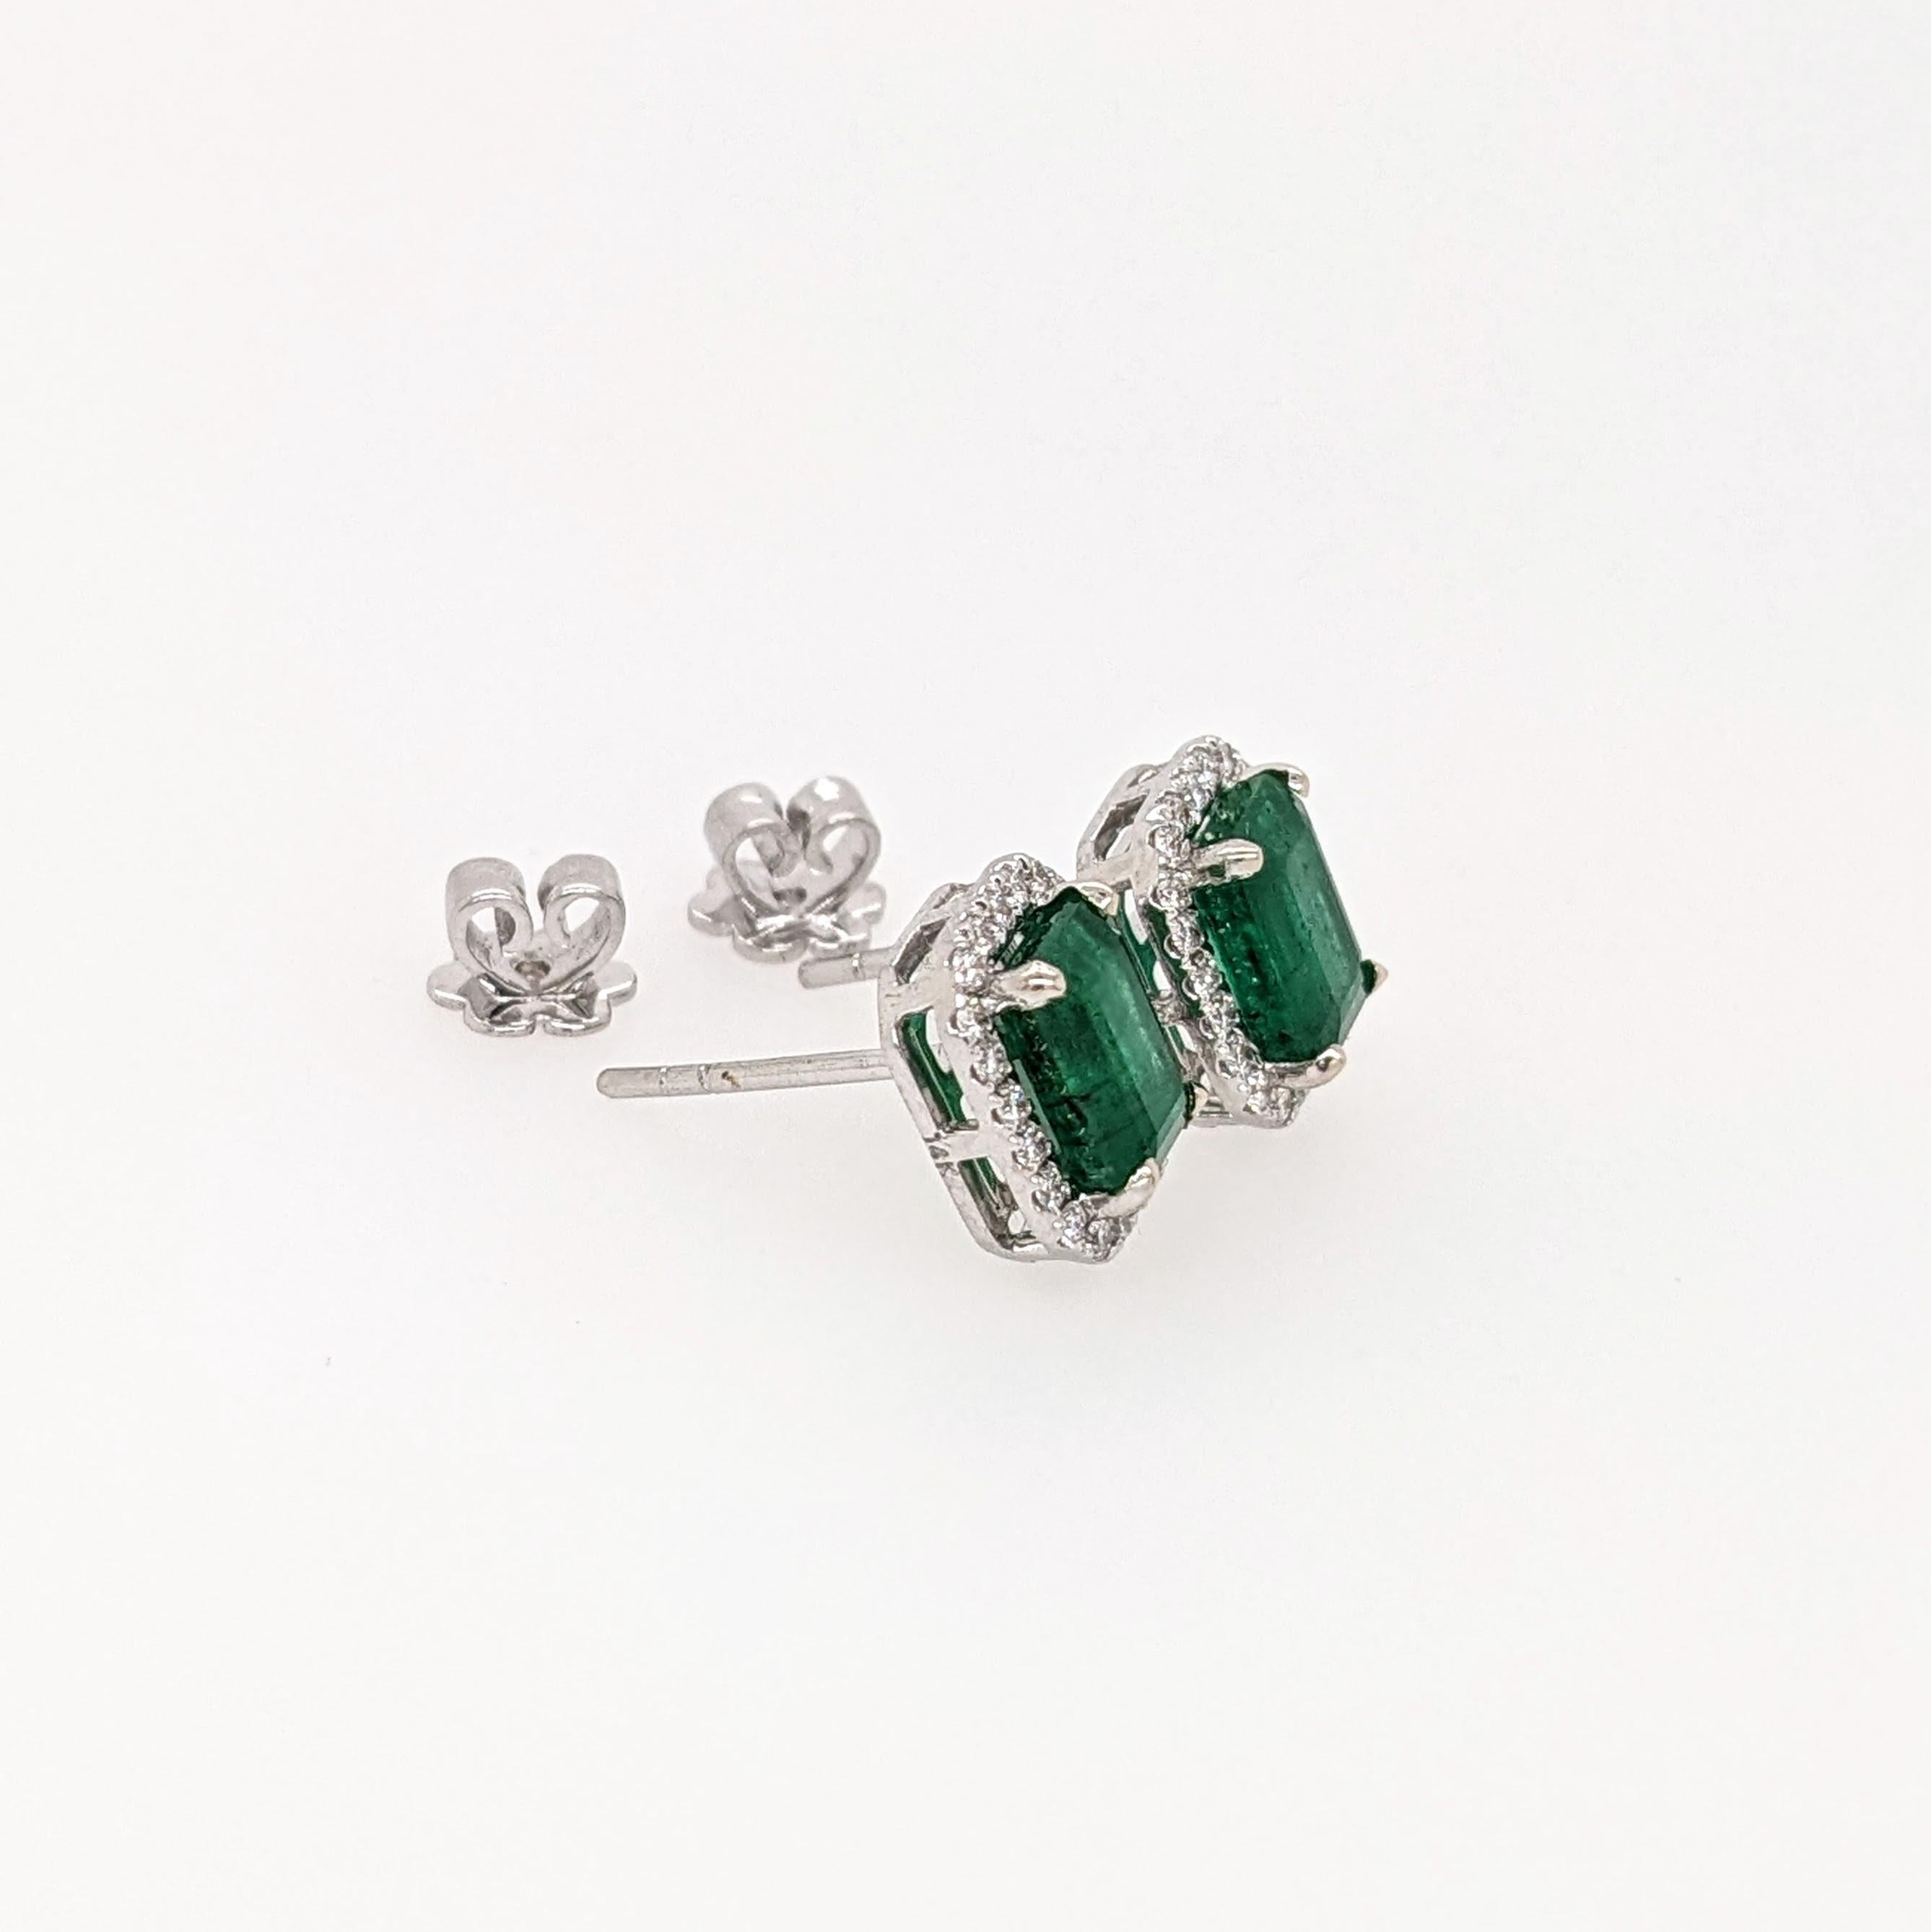 These sparkling earrings set feature a pair of vibrant earth mined Zambian Emeralds with a natural Diamond halo. A stunning pair of stud earrings which also make a beautiful May birthstone gift for your loved ones. 

Specifications

Item Type: